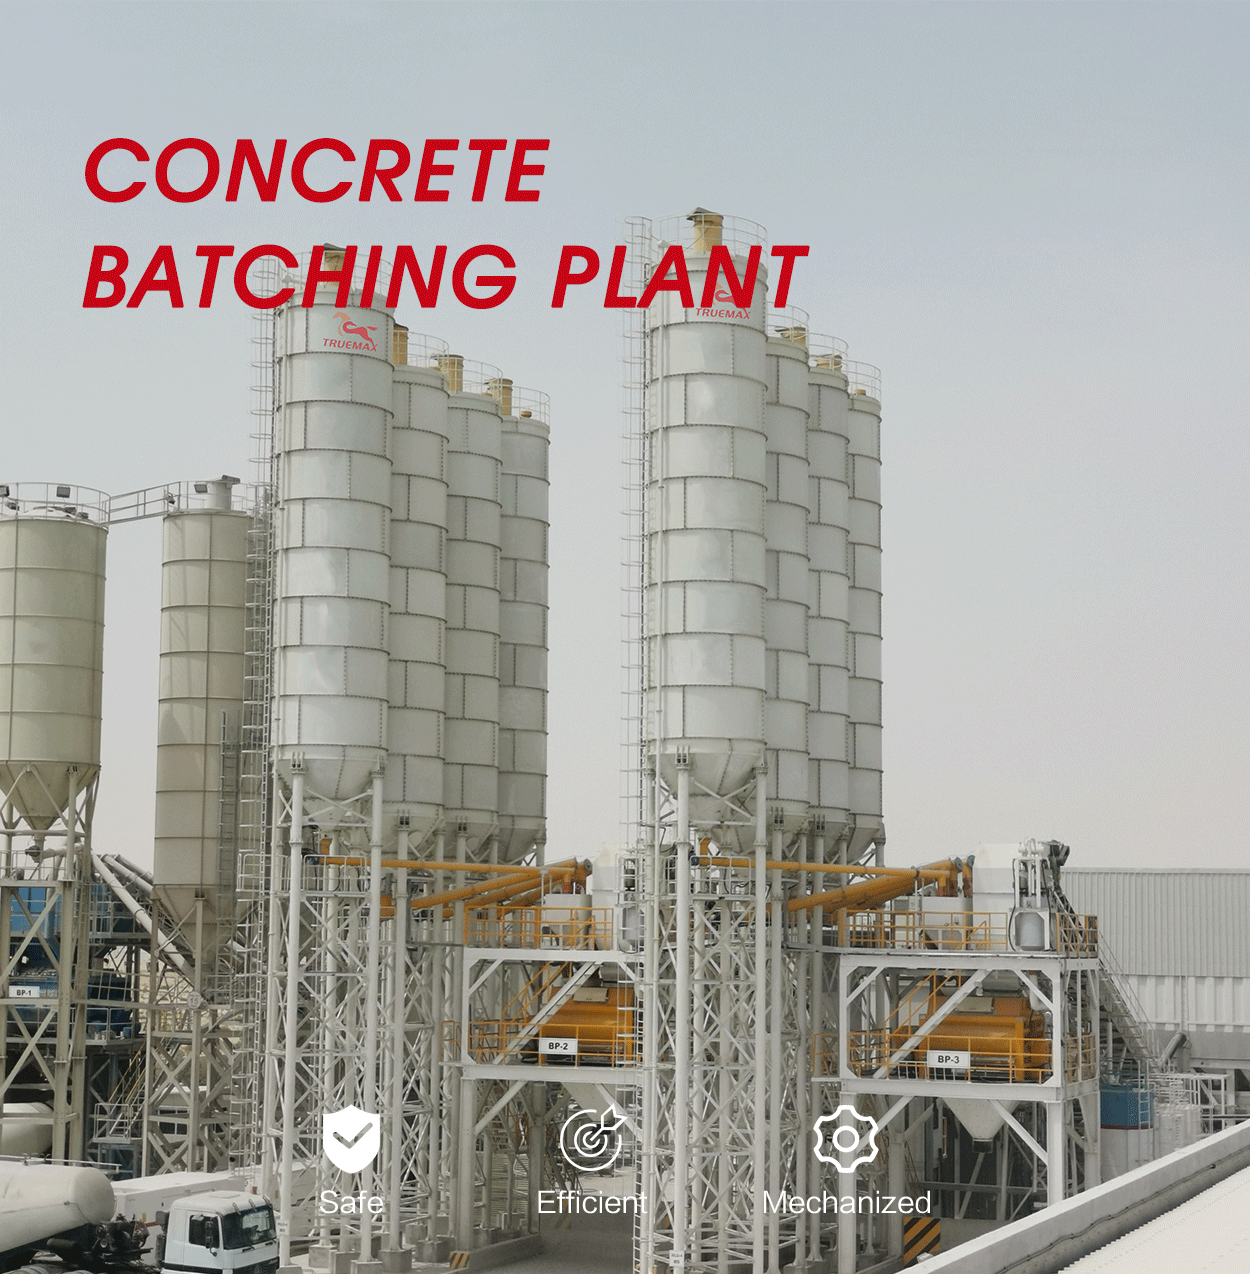 How much space does it take to build a small concrete batching plant?